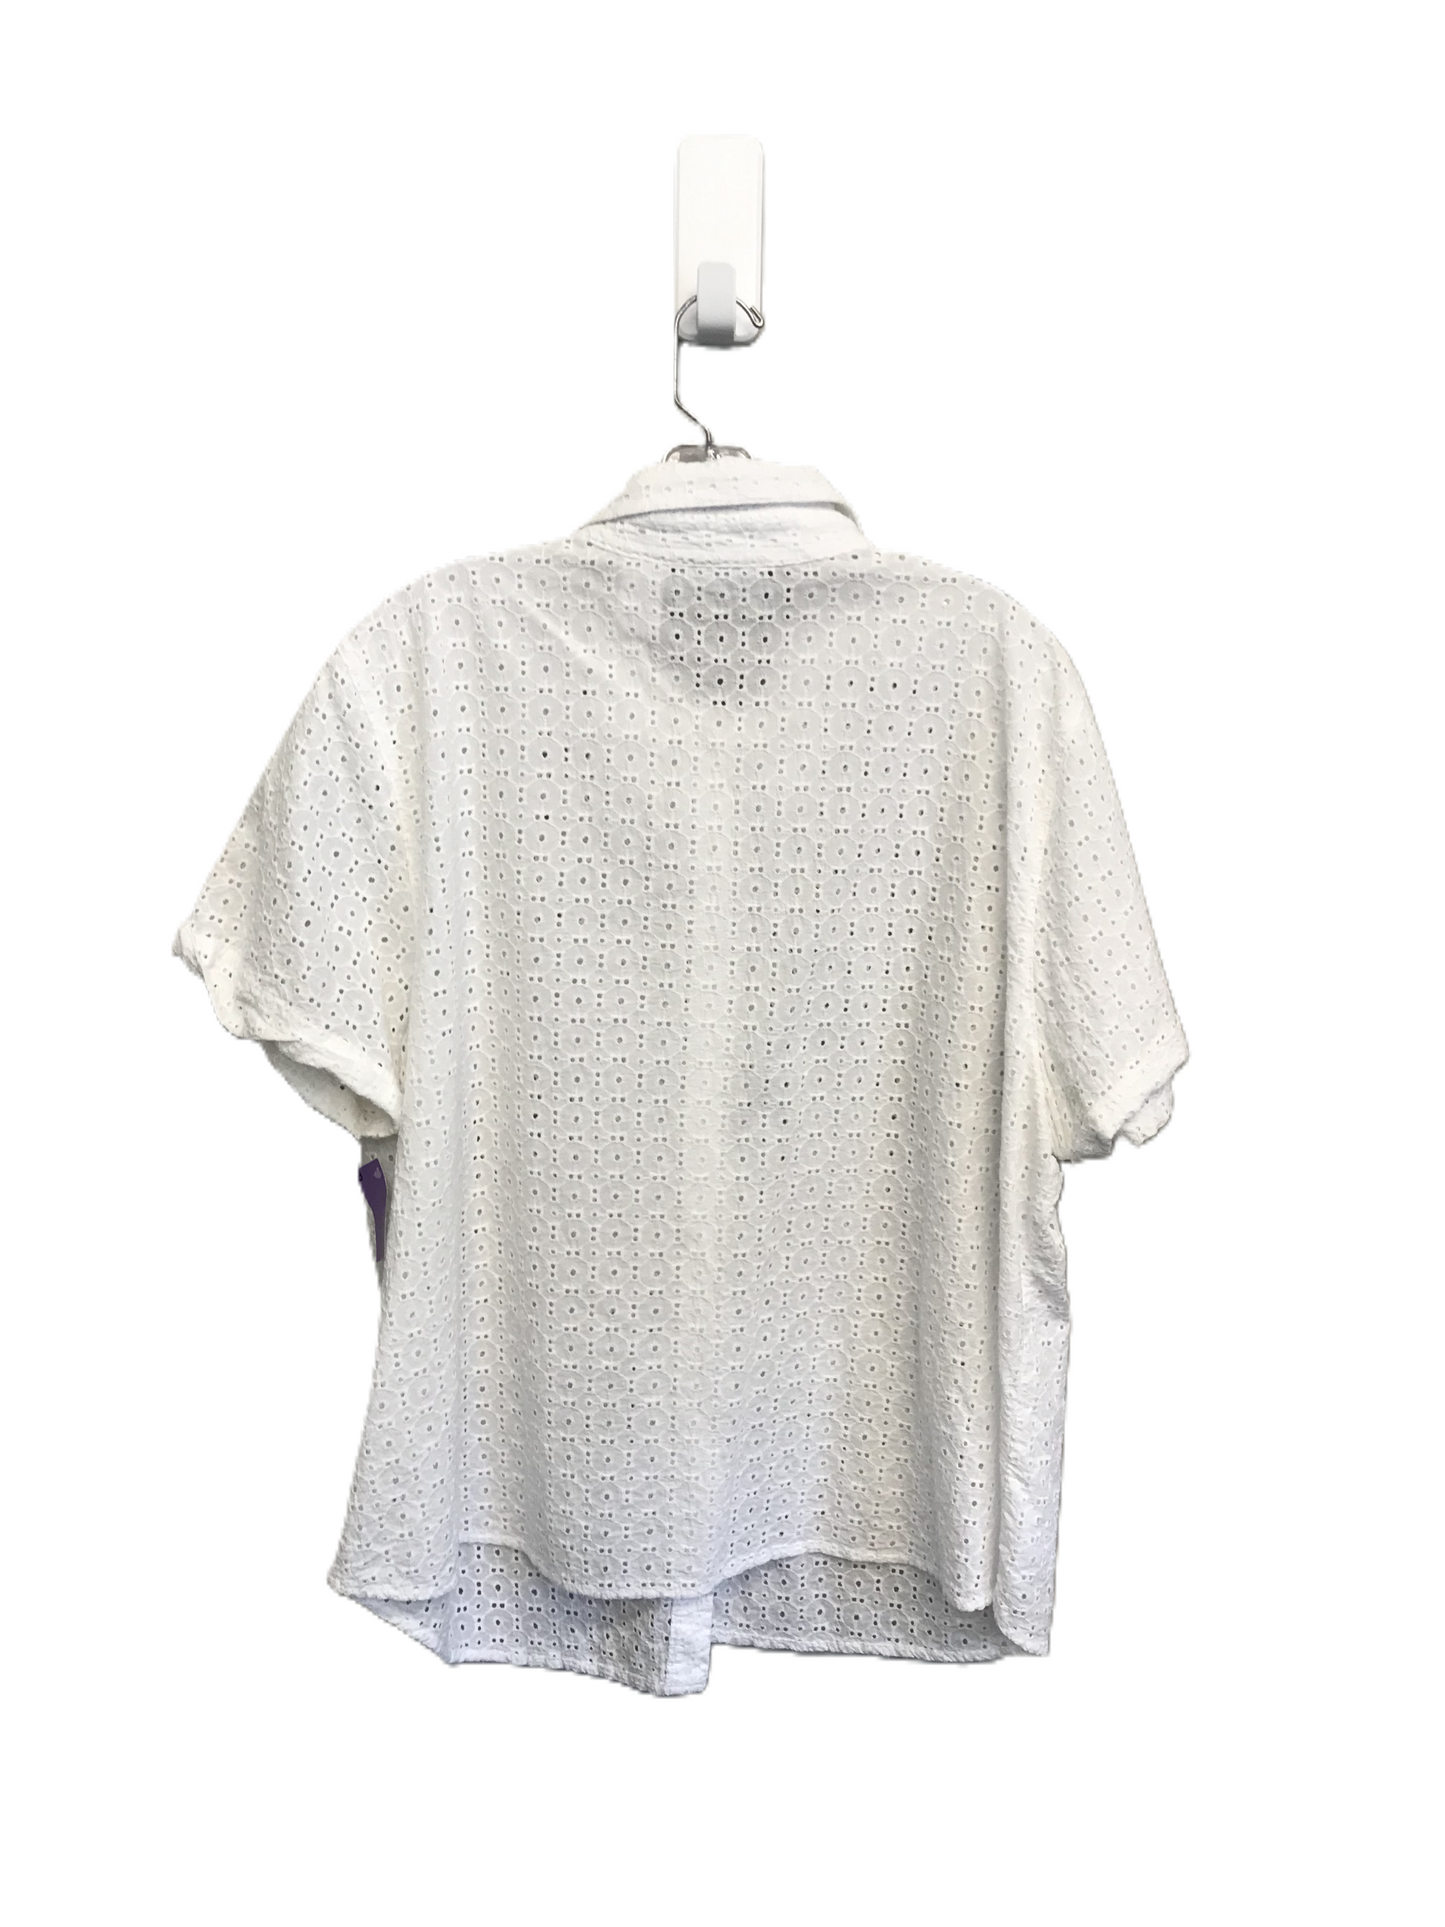 White Top Short Sleeve By Alfred Dunner, Size: 1x